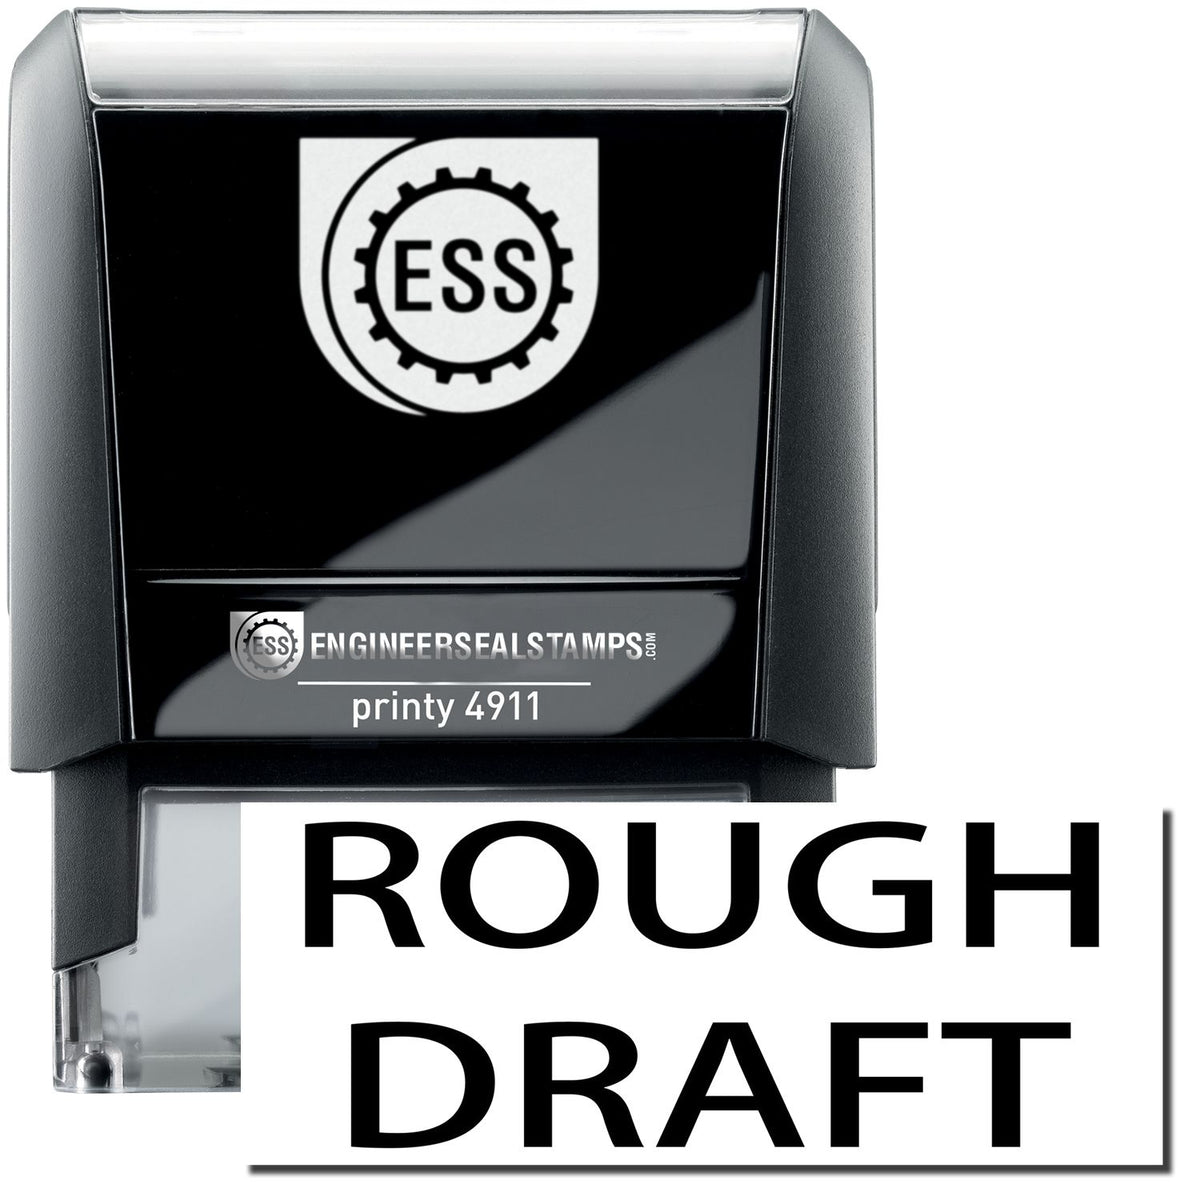 A self-inking stamp with a stamped image showing how the text &quot;ROUGH DRAFT&quot; is displayed after stamping.